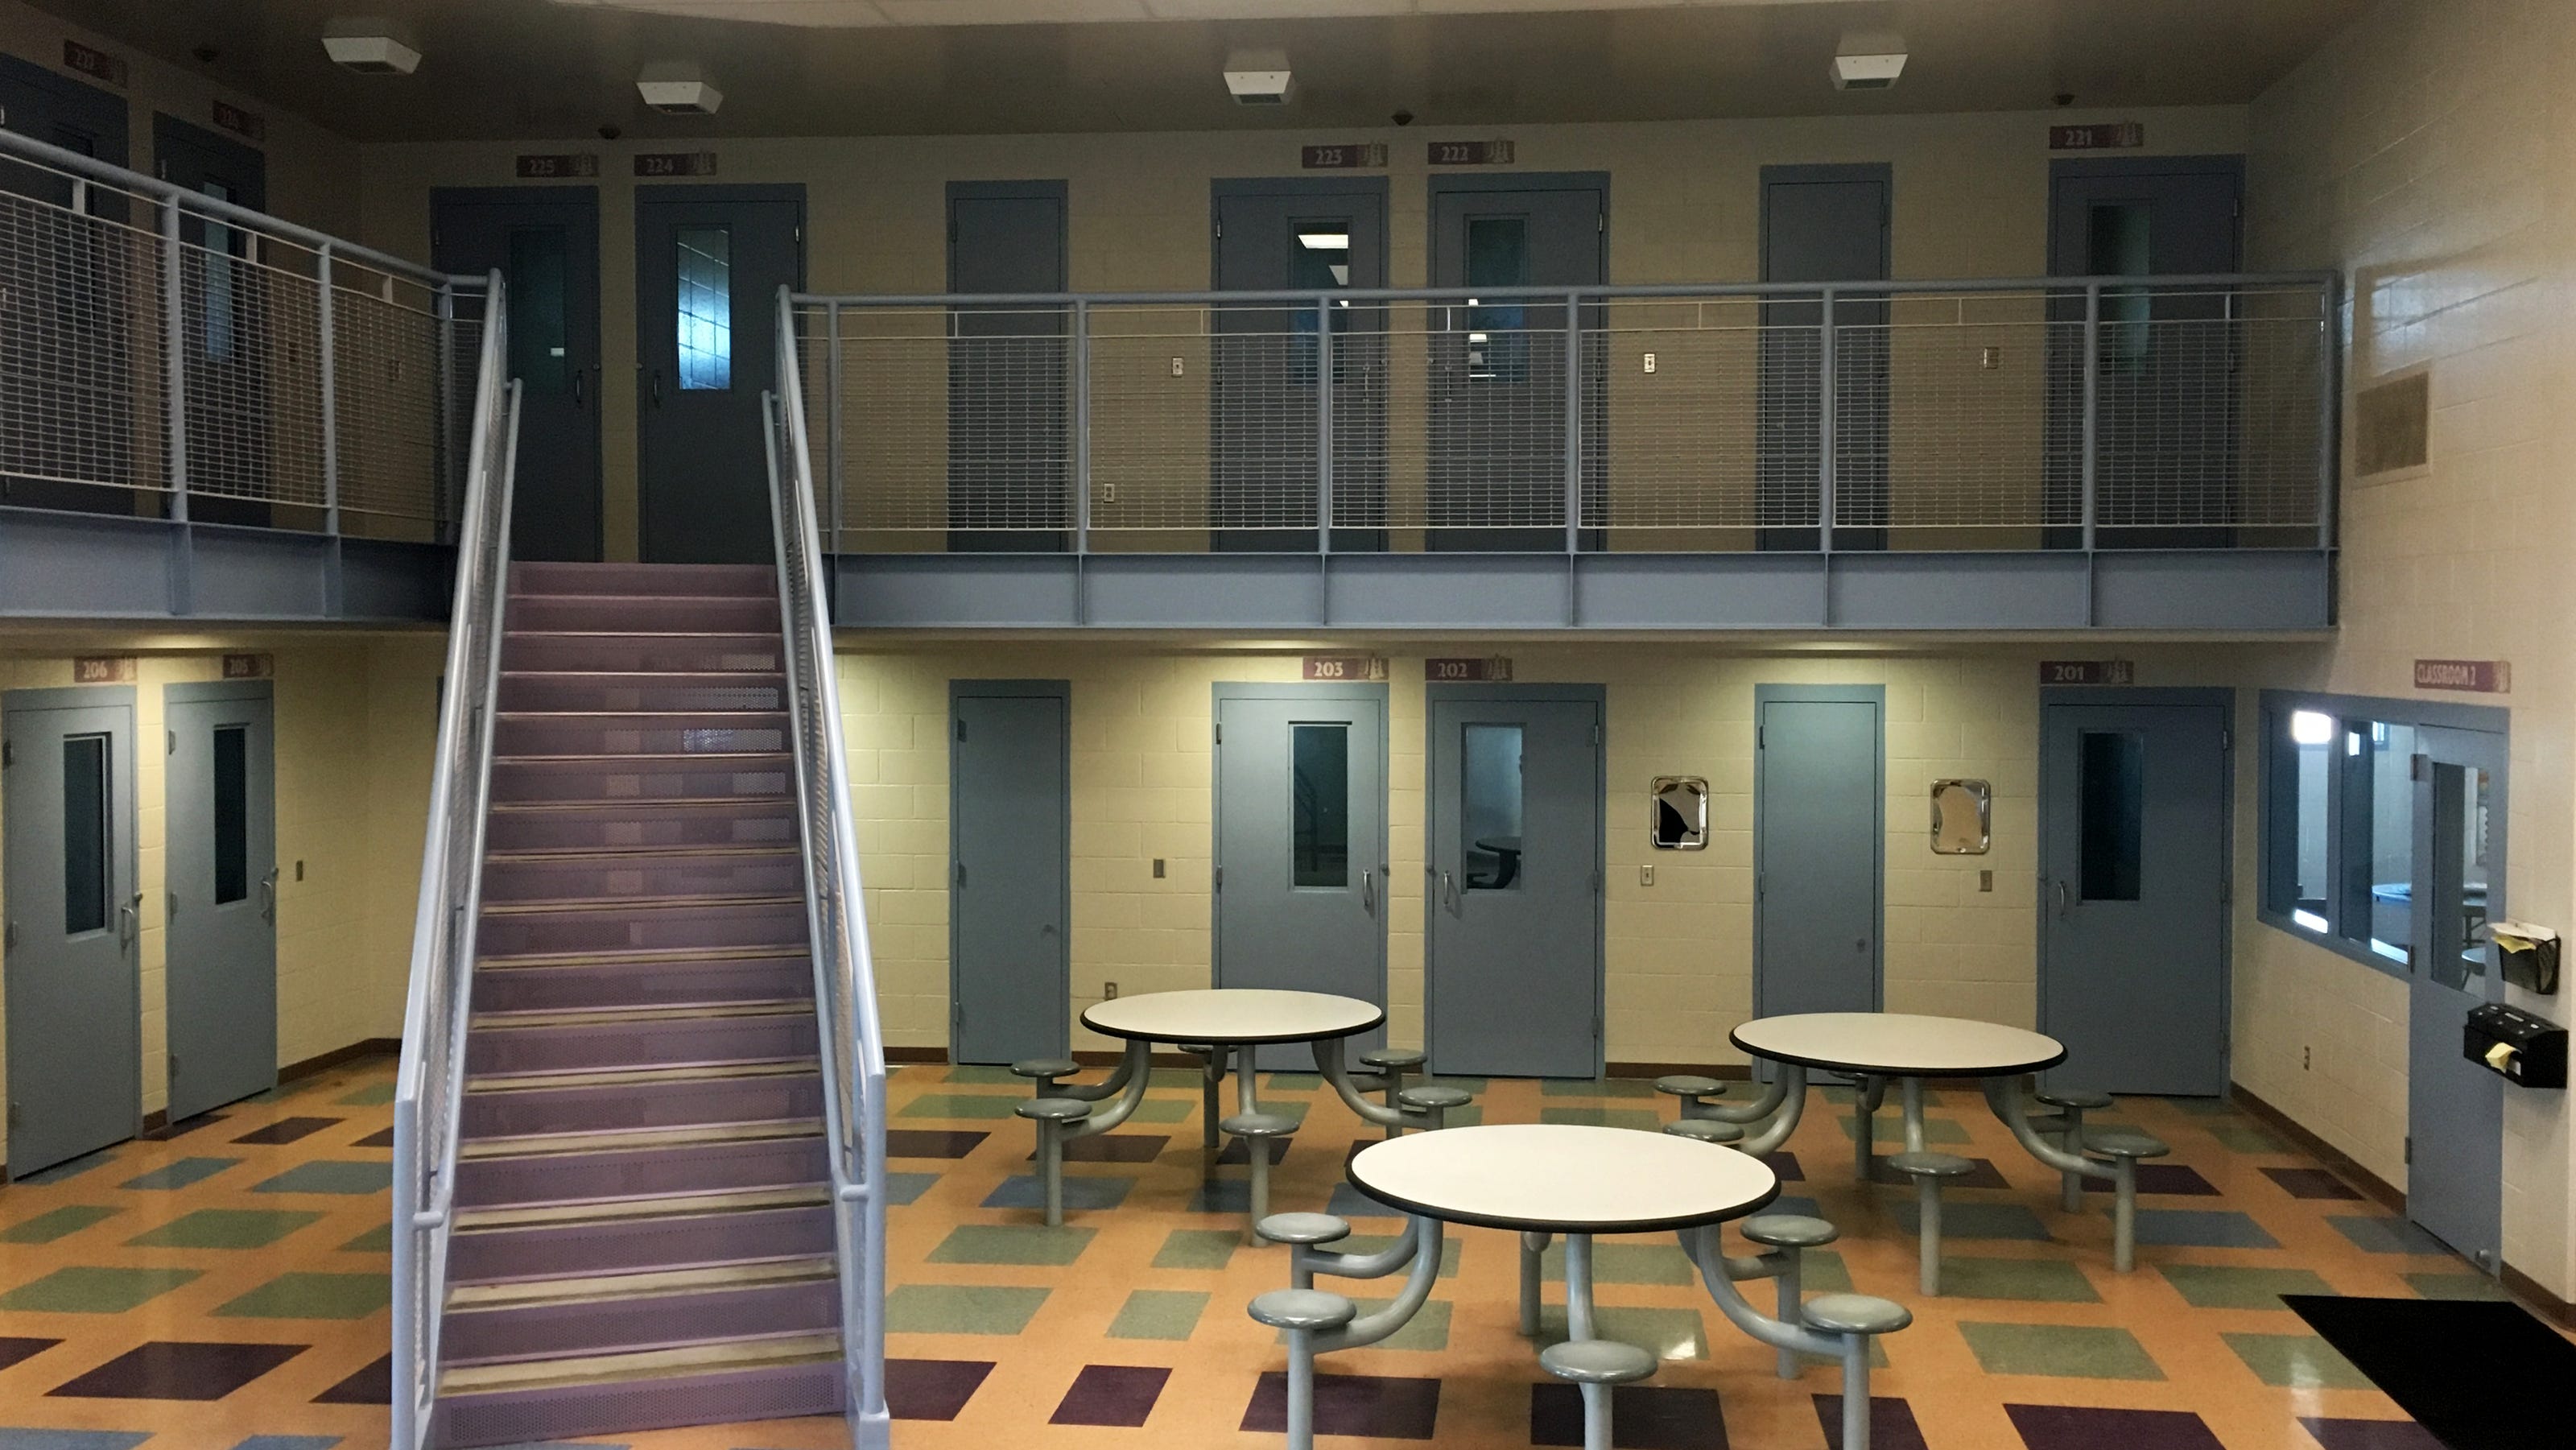 Ventura County juvenile hall could holdoffenders